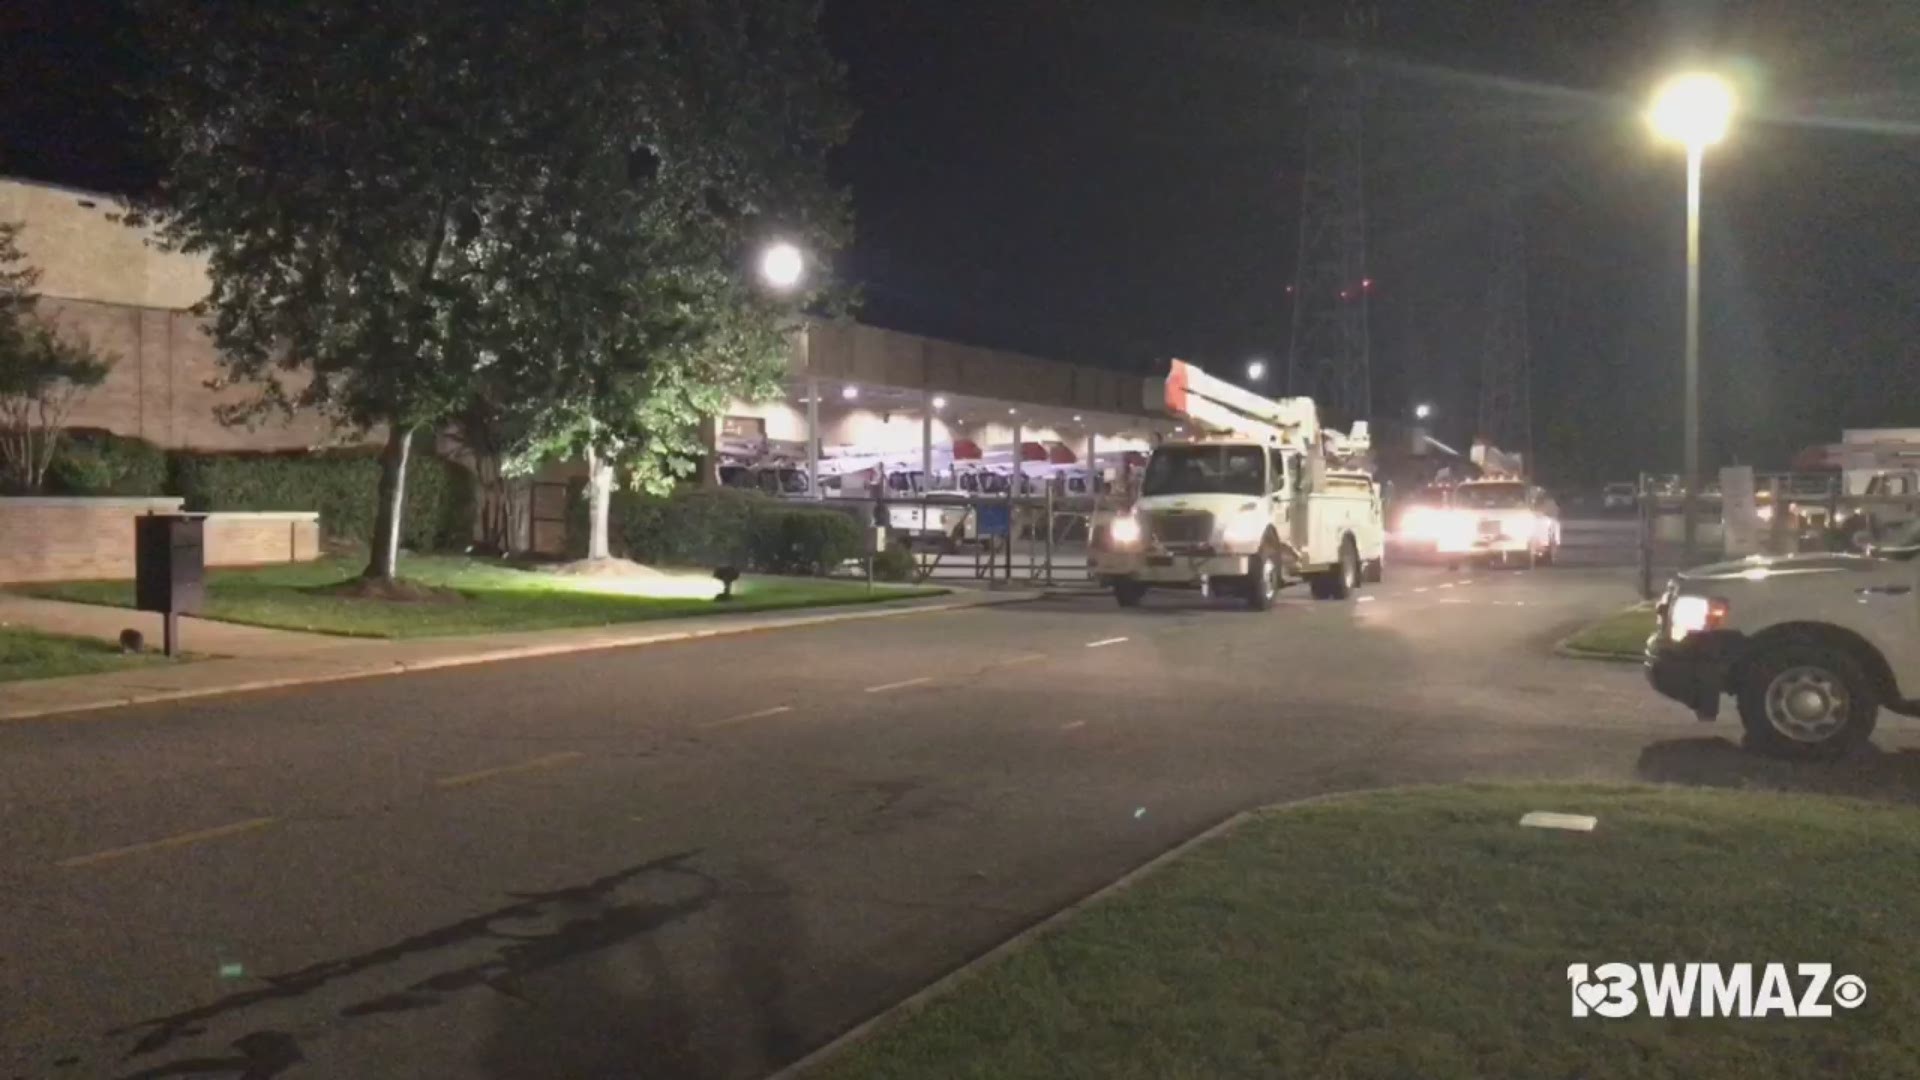 Georgia Power line crews started leaving around 6 a.m. Thursday for the coast to help out with Hurricane Dorian efforts.